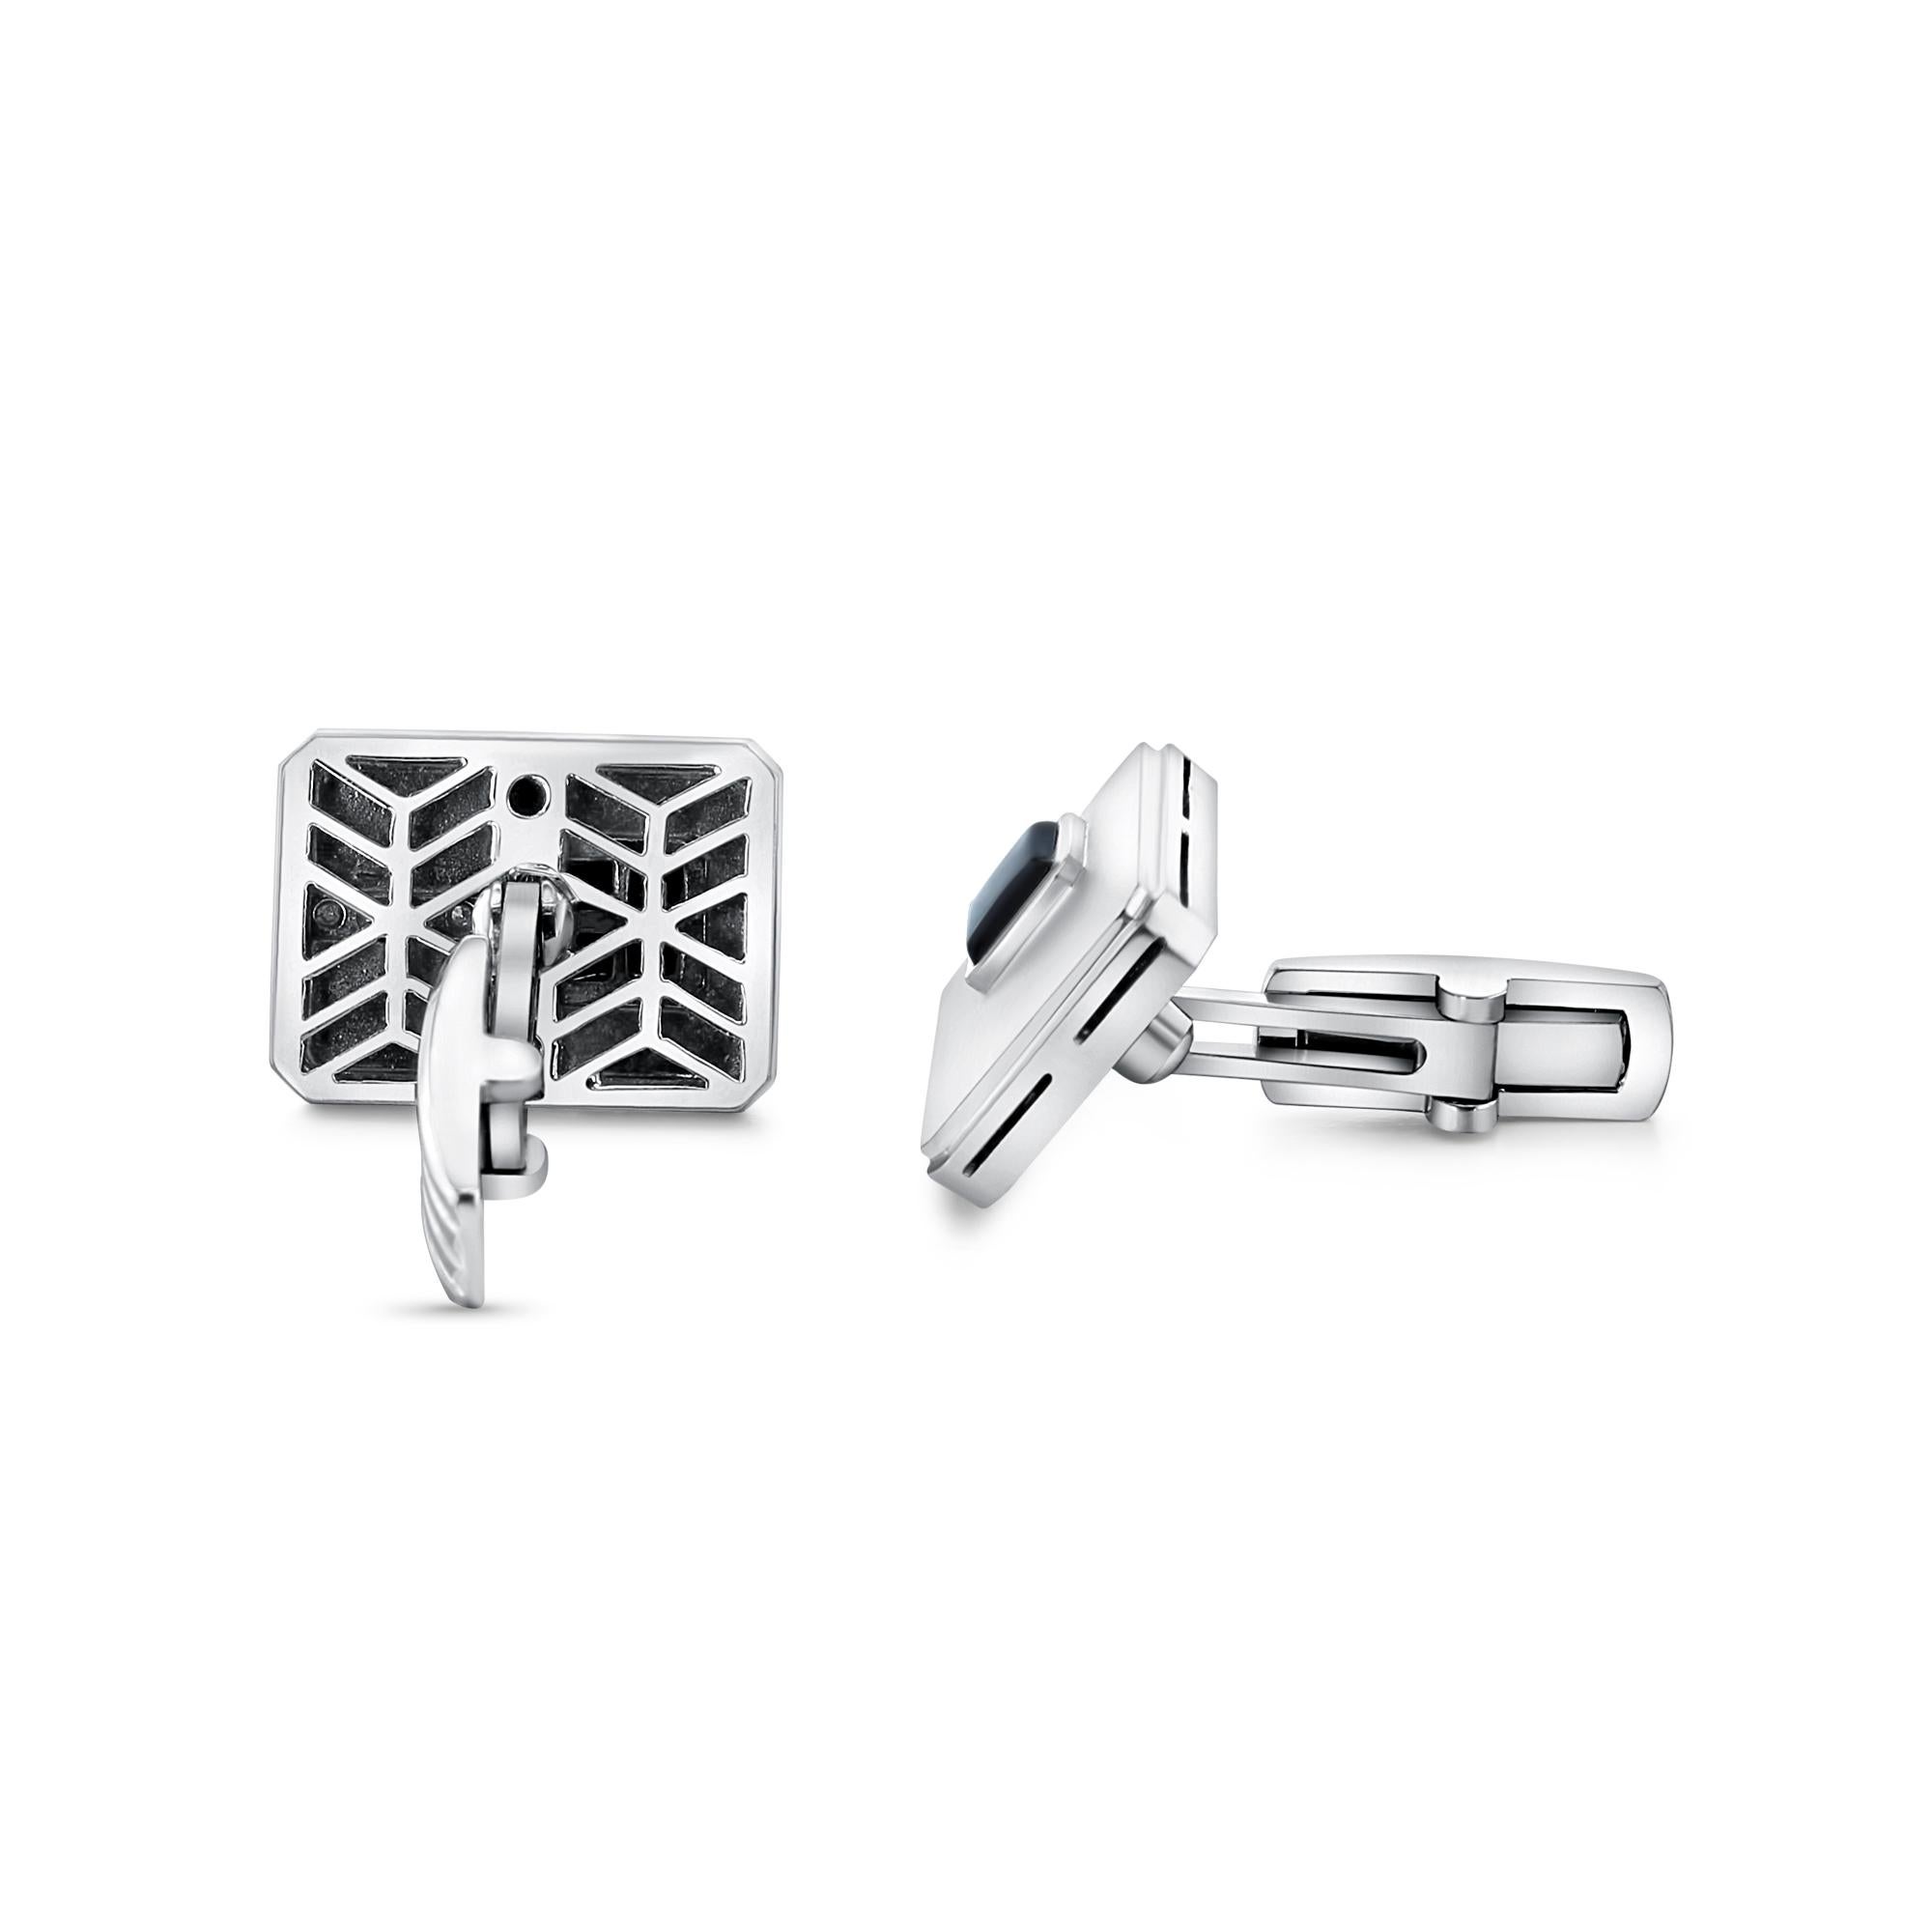 Rectangle Shaped Diamond & Onyx Cuff links with Brushed Satin Finish in 14k White Gold

These cuff links are a striking combination of elegance and modern sophistication, featuring sparkling diamonds meticulously set within a rectangular Onyx